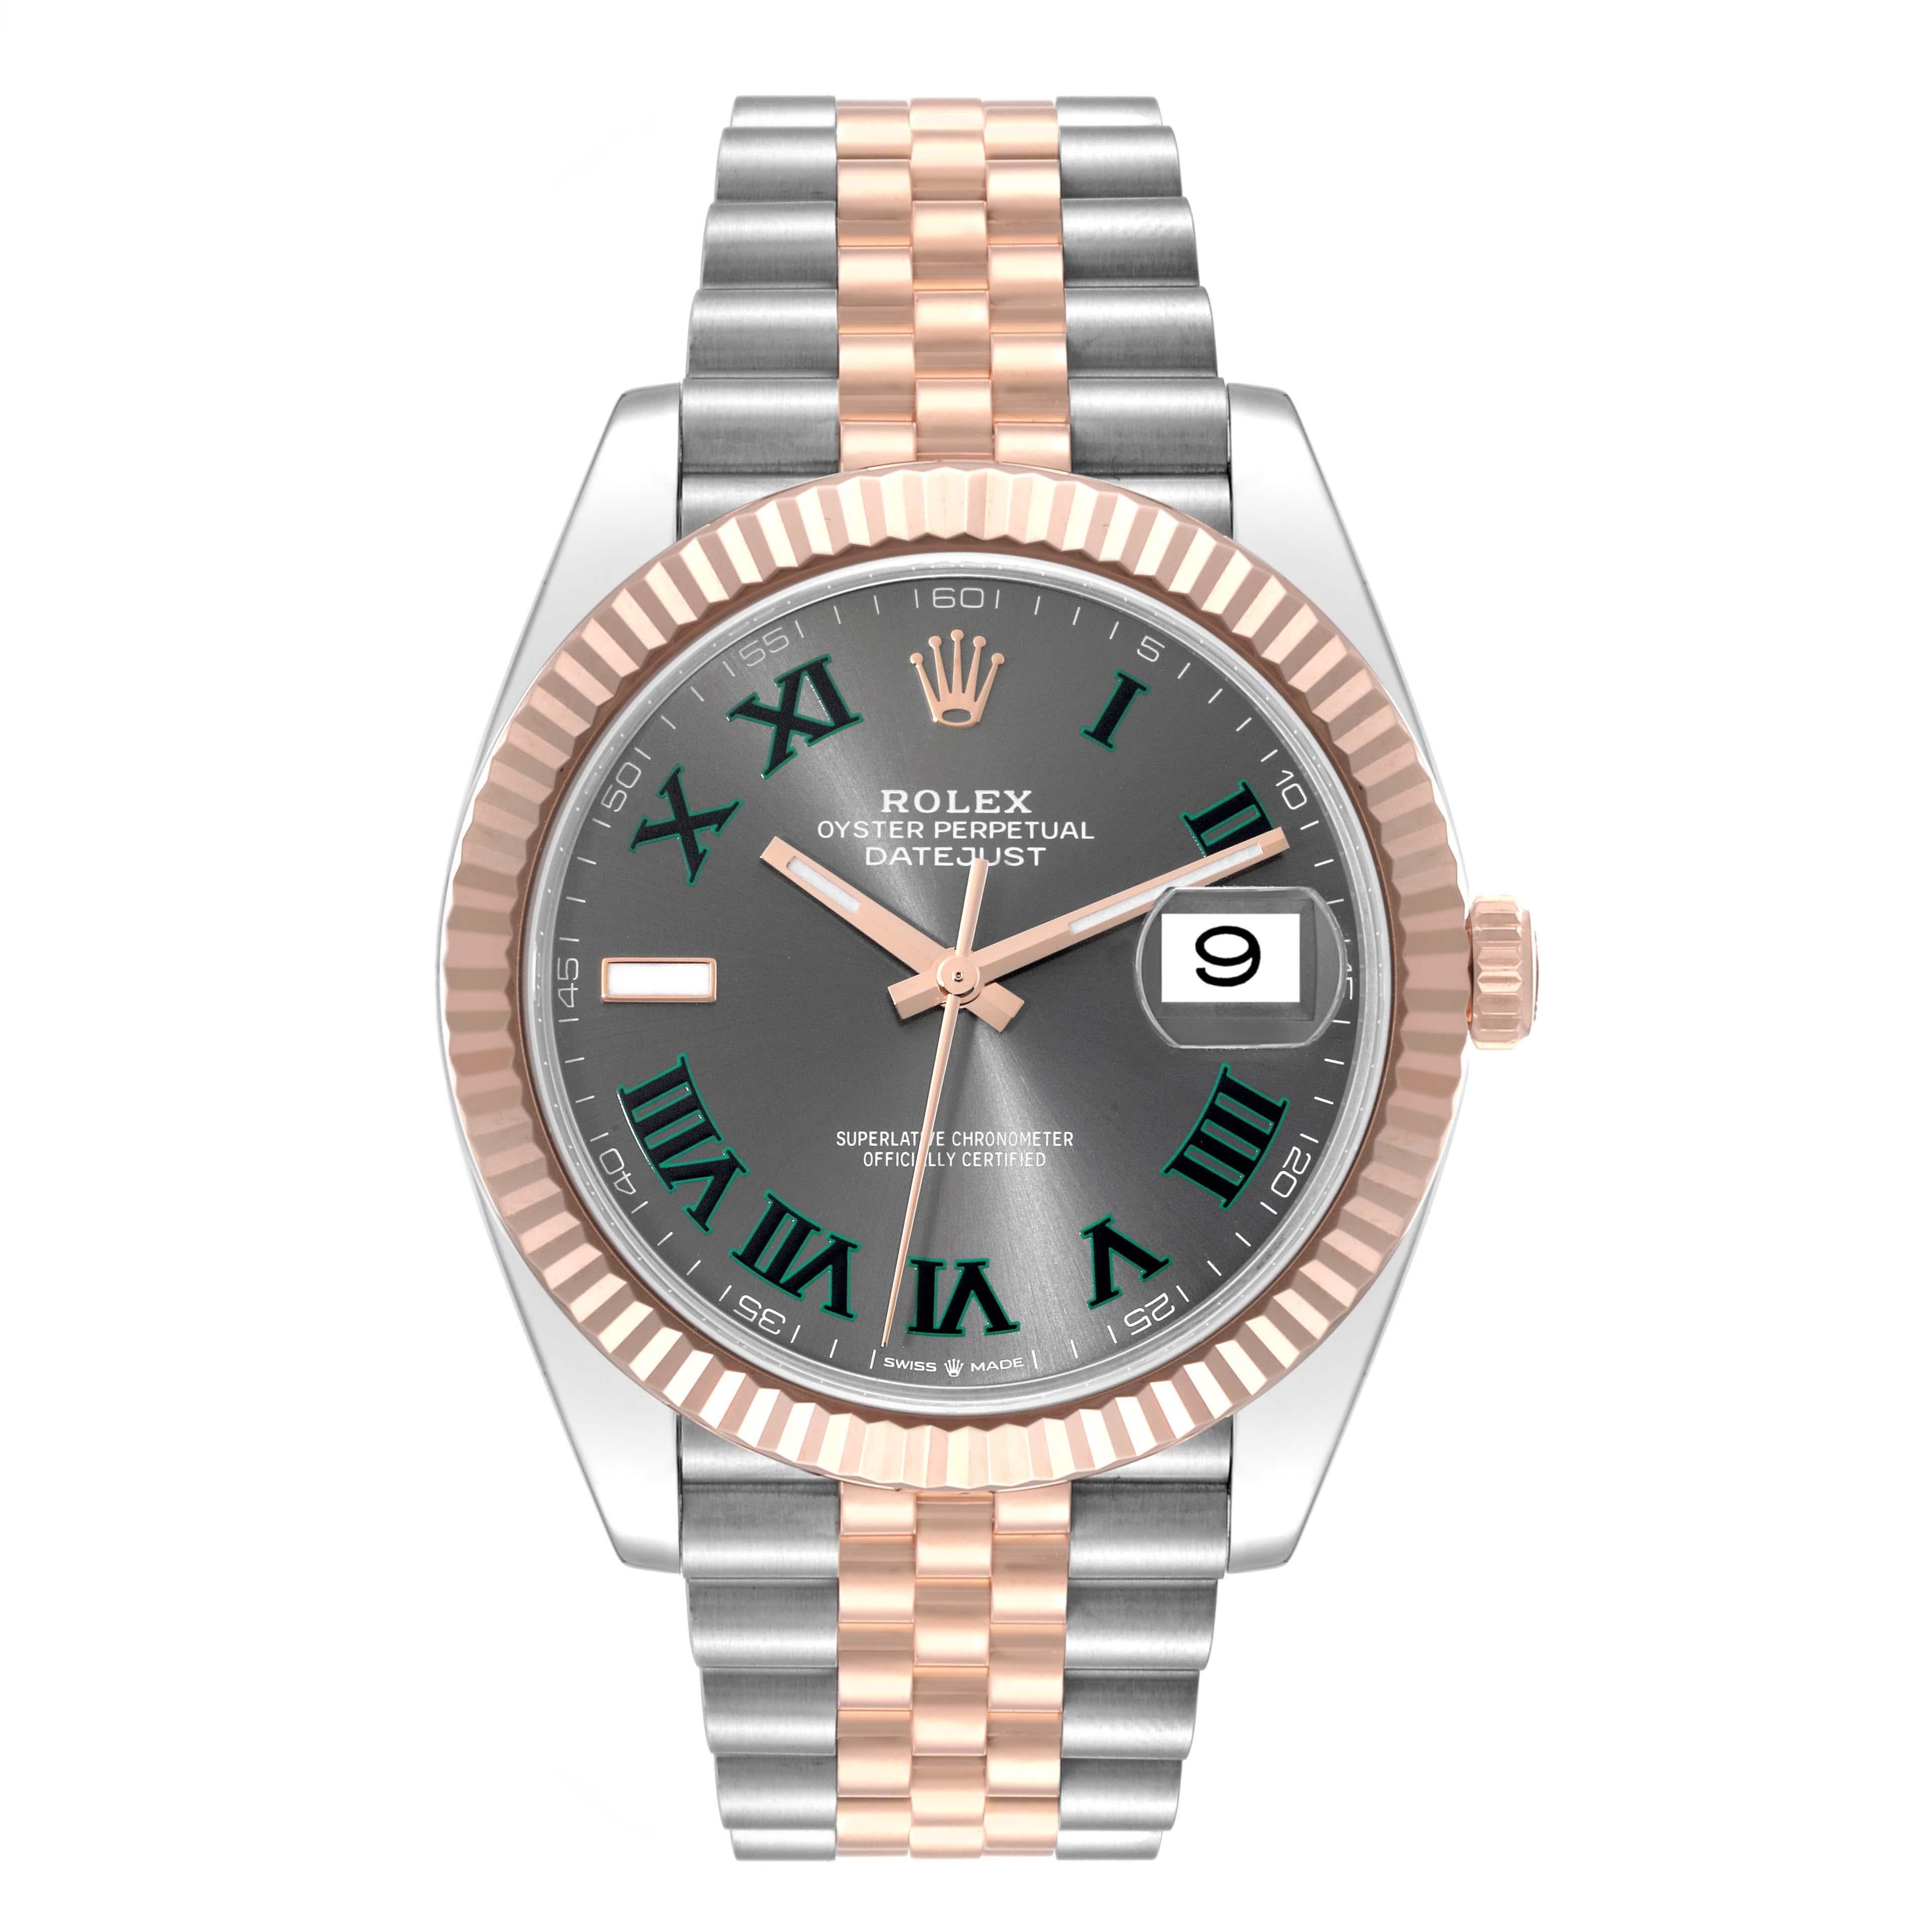 Rolex Datejust 41 Steel Rose Gold Wimbledon Dial Mens Watch 126331. Officially certified chronometer self-winding movement. Stainless steel and 18K rose gold case 41.0 mm in diameter. Rolex logo on a crown. 18K rose gold fluted bezel. Scratch